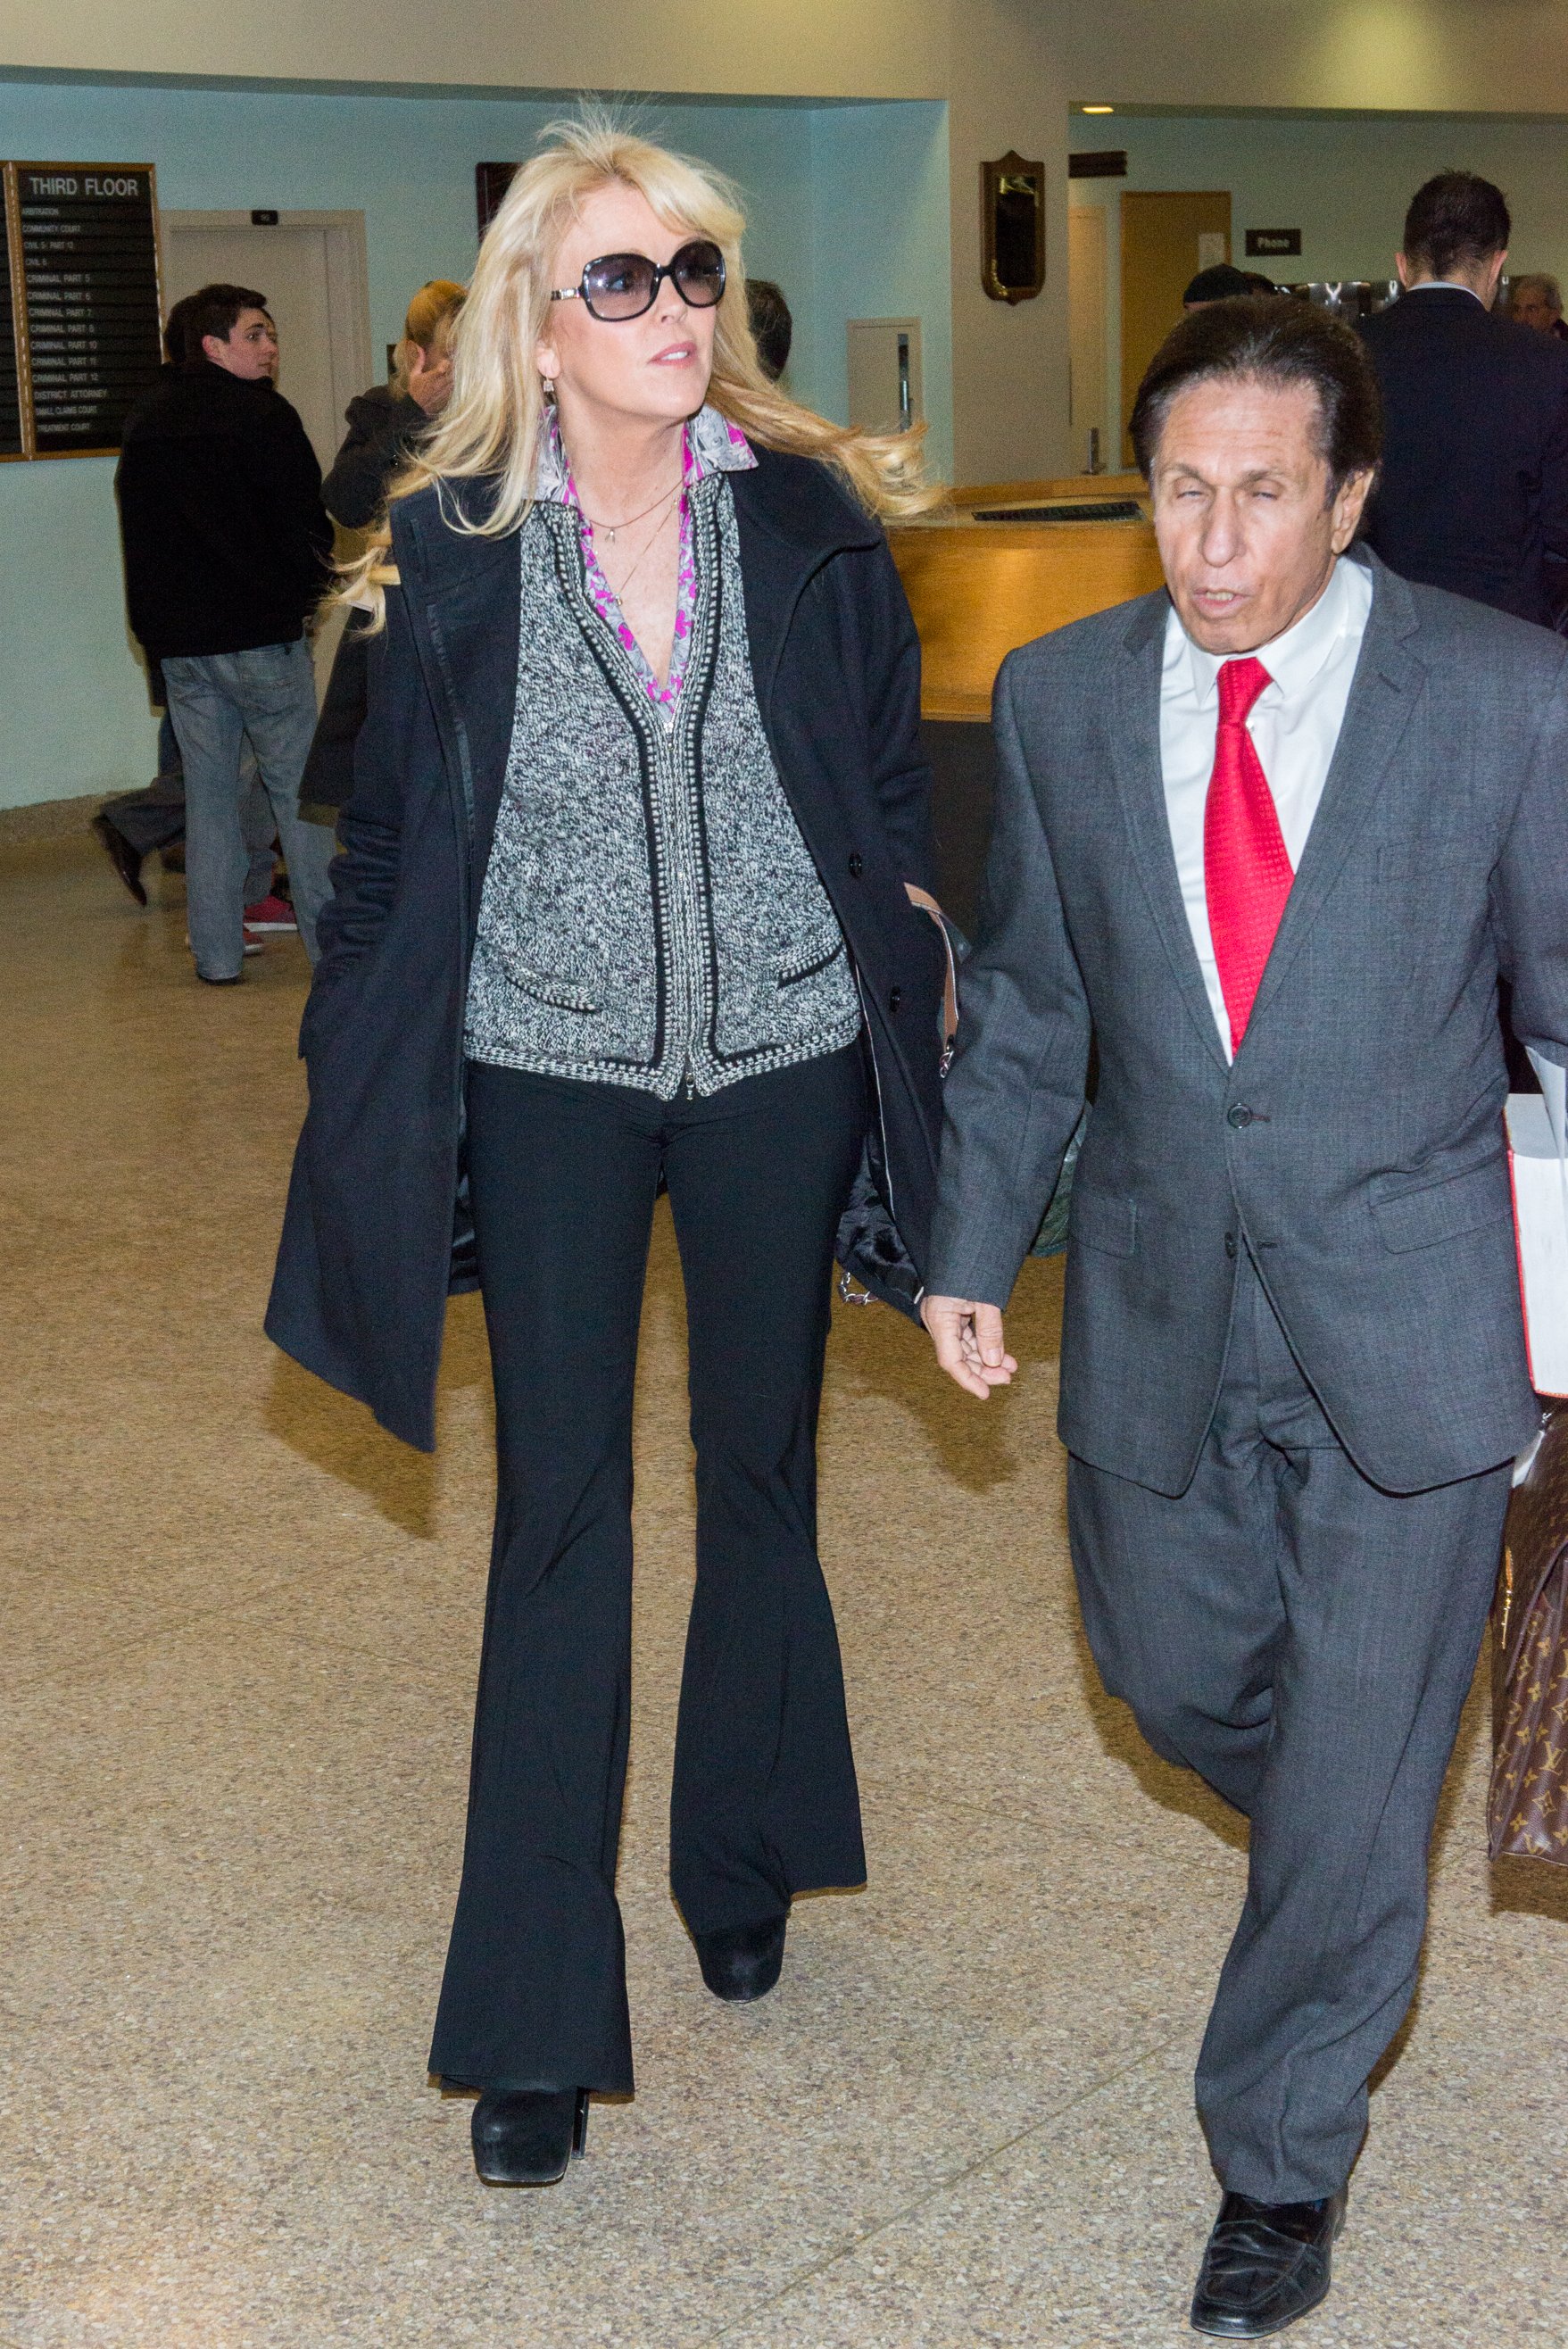 Dina Lohan in court for a hearing with her attorney Mark Heller at Nassau County First District Court in Hempstead, New York | Photo: Mike Pont/Getty Images